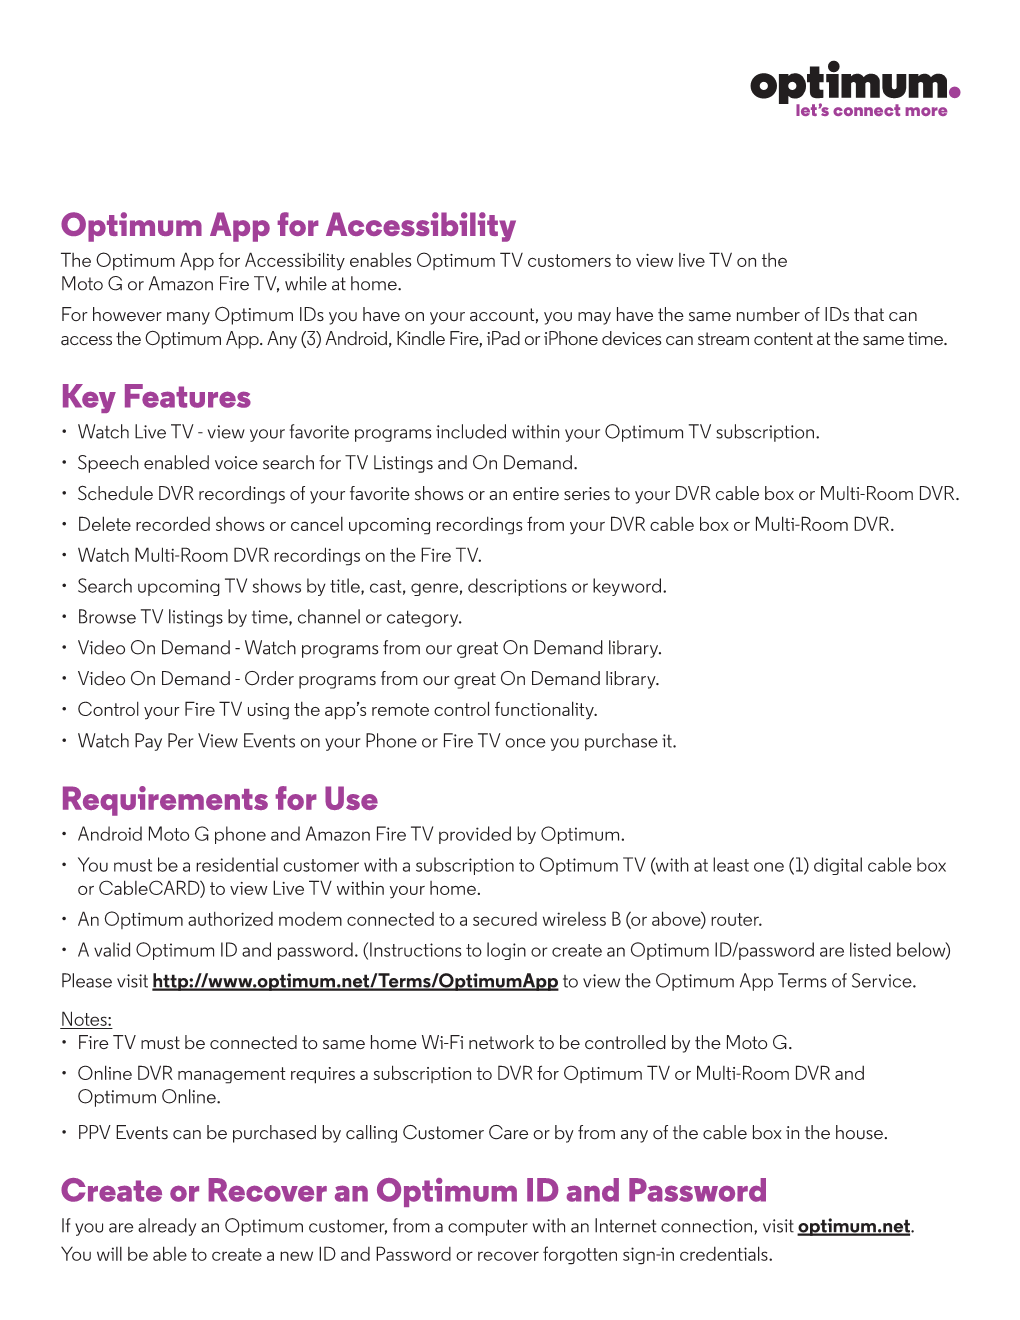 Optimum App for Accessibility Key Features Requirements for Use